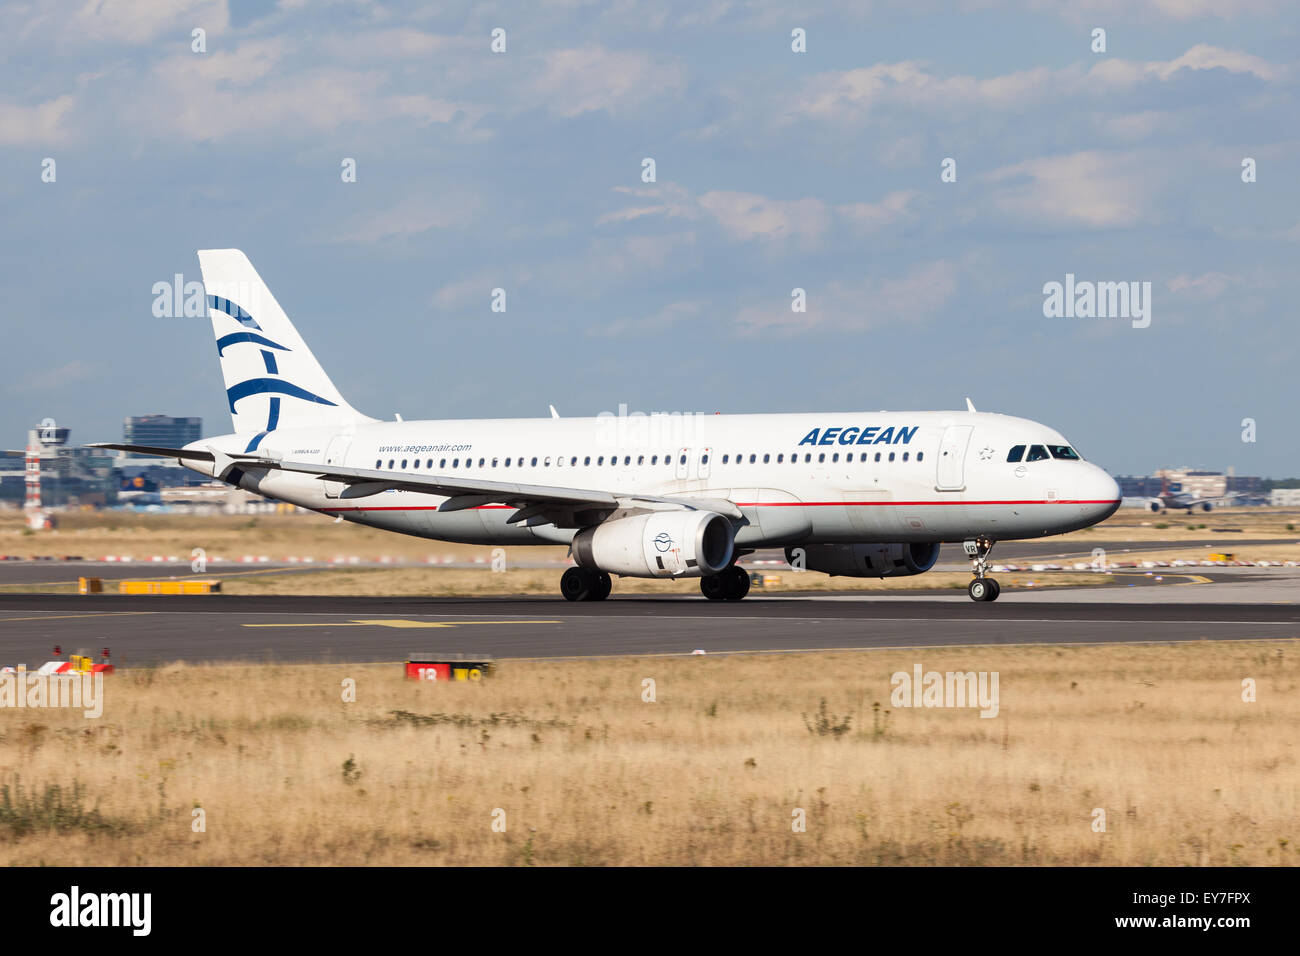 Aegean Airlines Airbus A320 starting from the Frankfurt International Airport Stock Photo